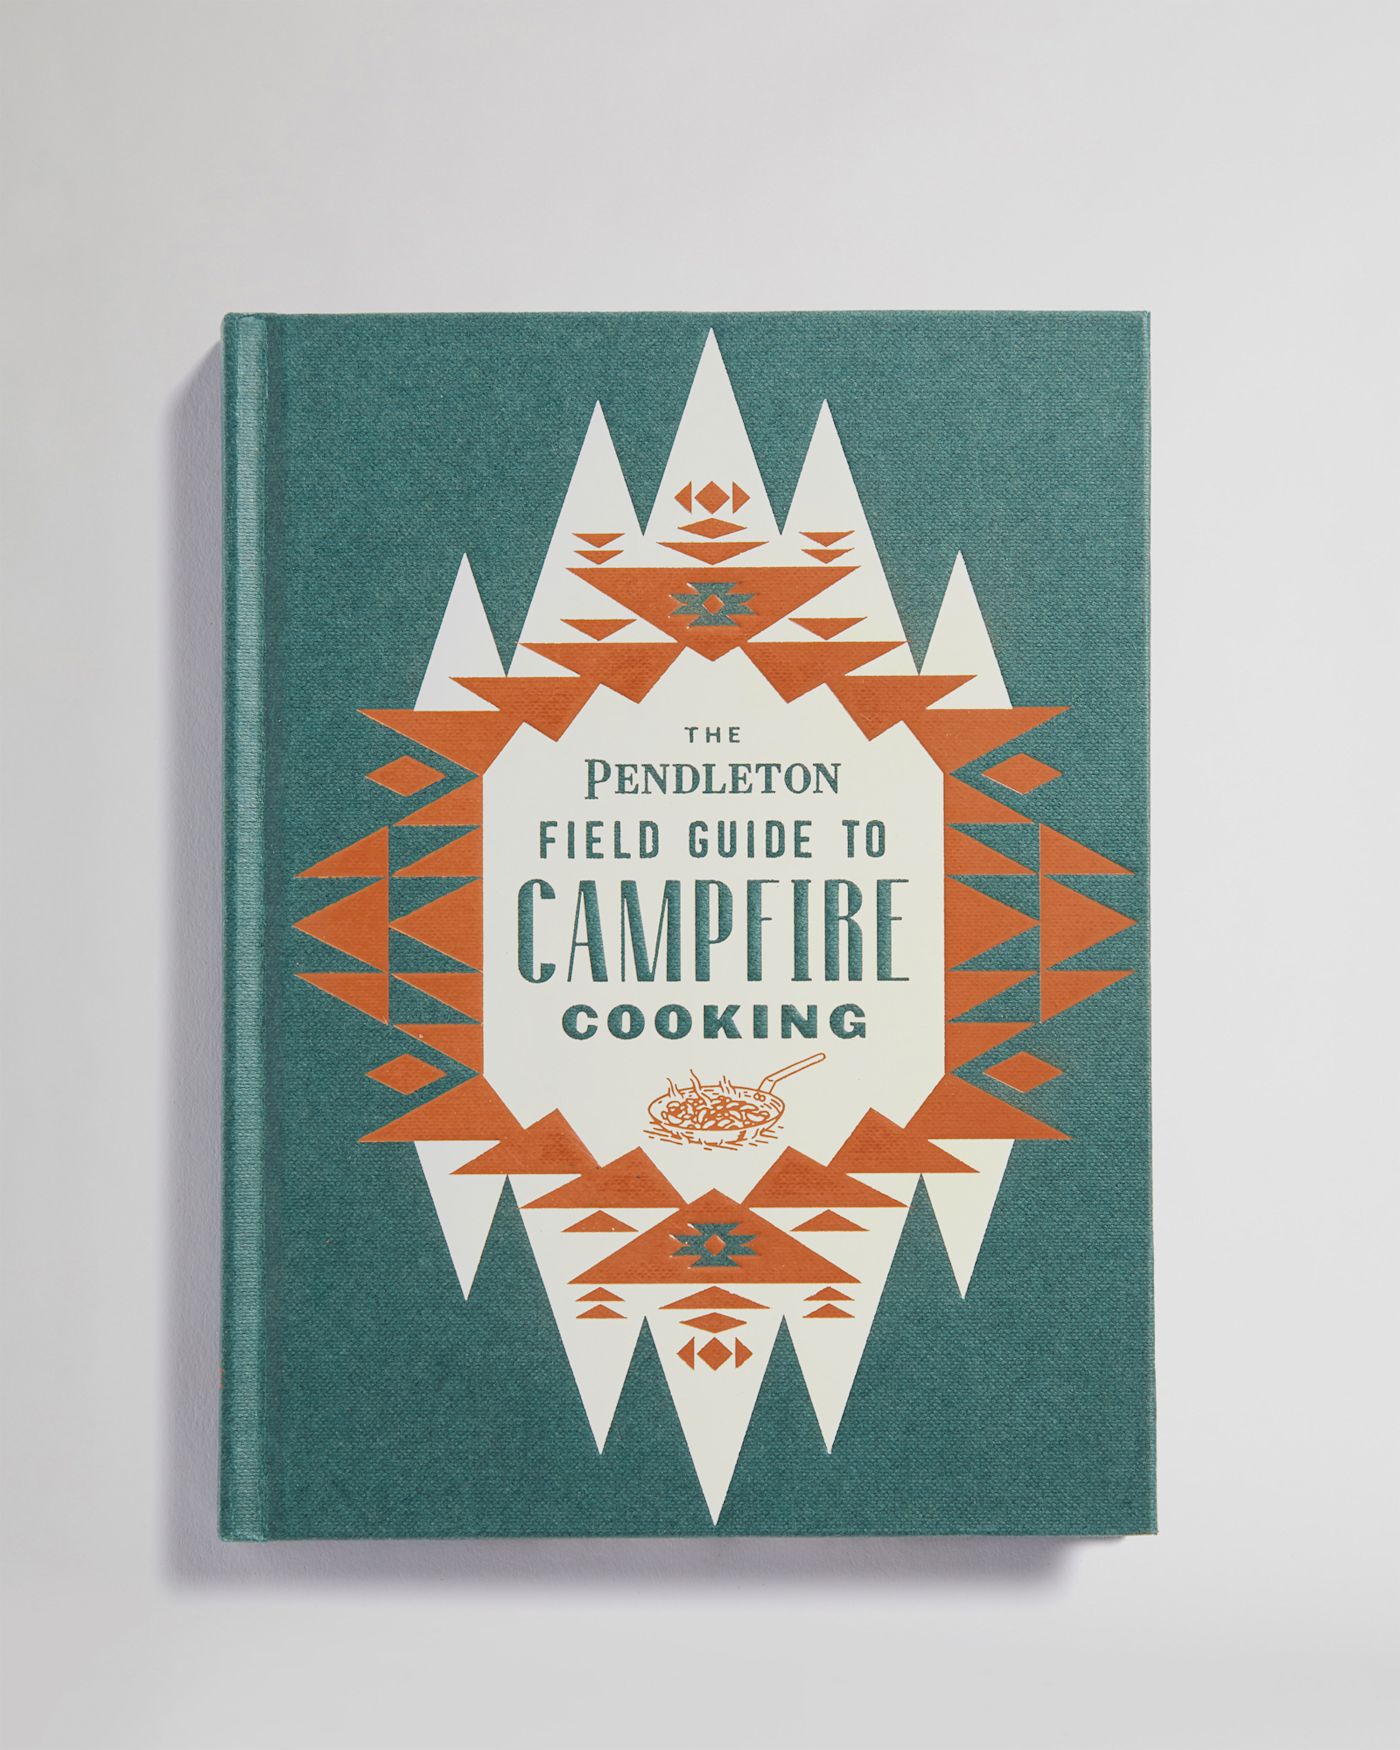 THE PENDLETON FIELD GUIDE TO CAMPFIRE COOKING